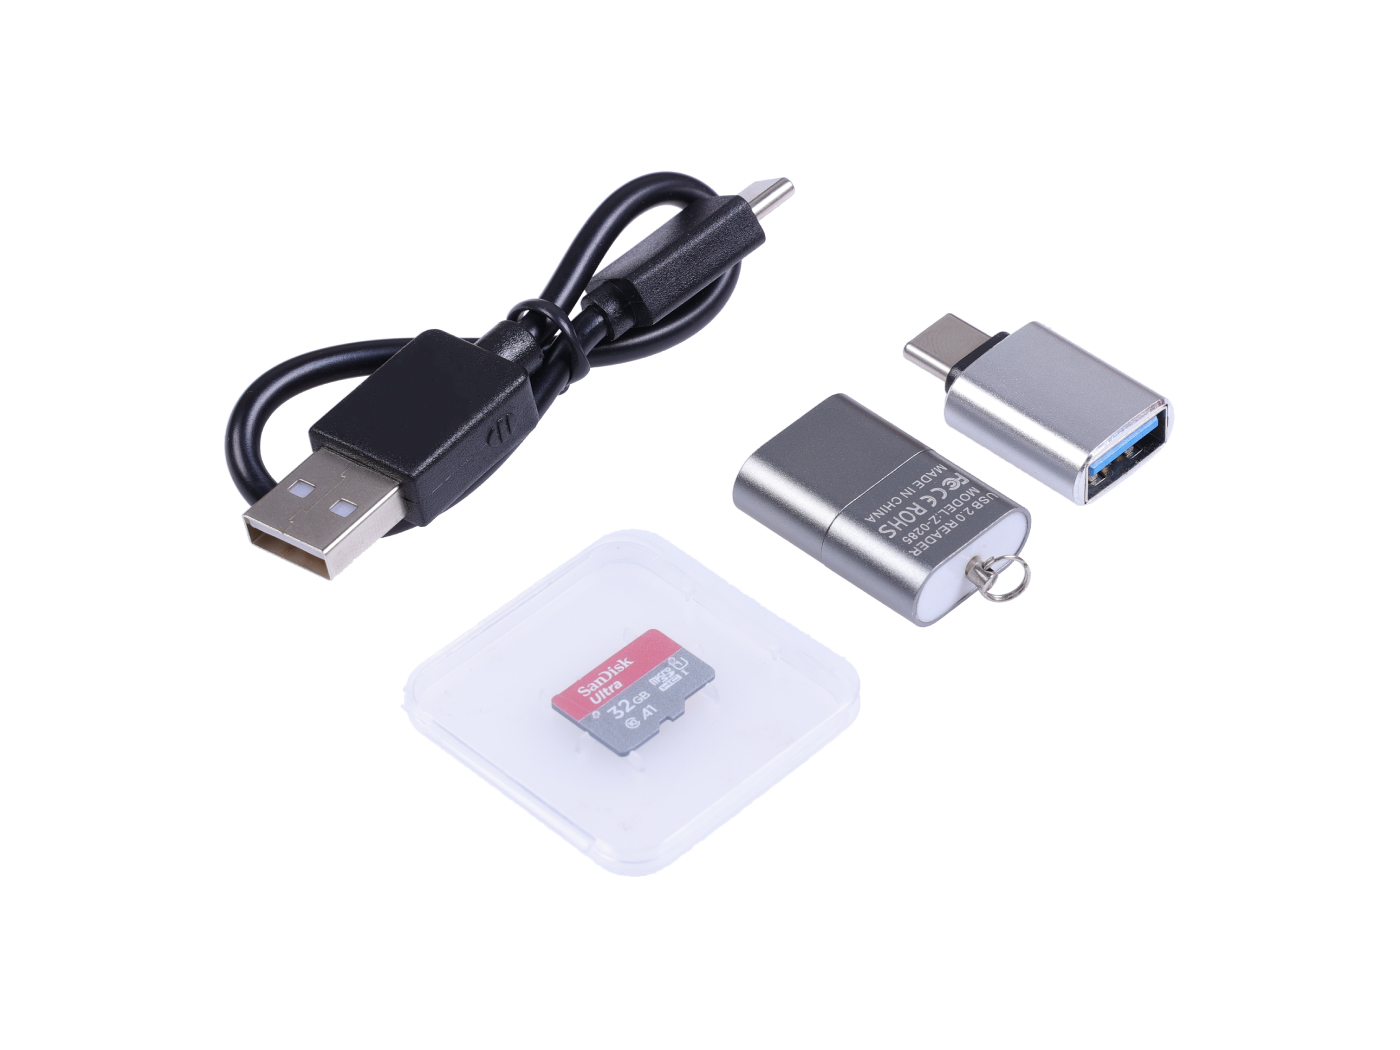 [110991944]Micro SD Card Tool Kit - 32GB SanDisk SD card, SD card reader, Type-C to Type-A function module, 20cm Type-C to Type-A data cable